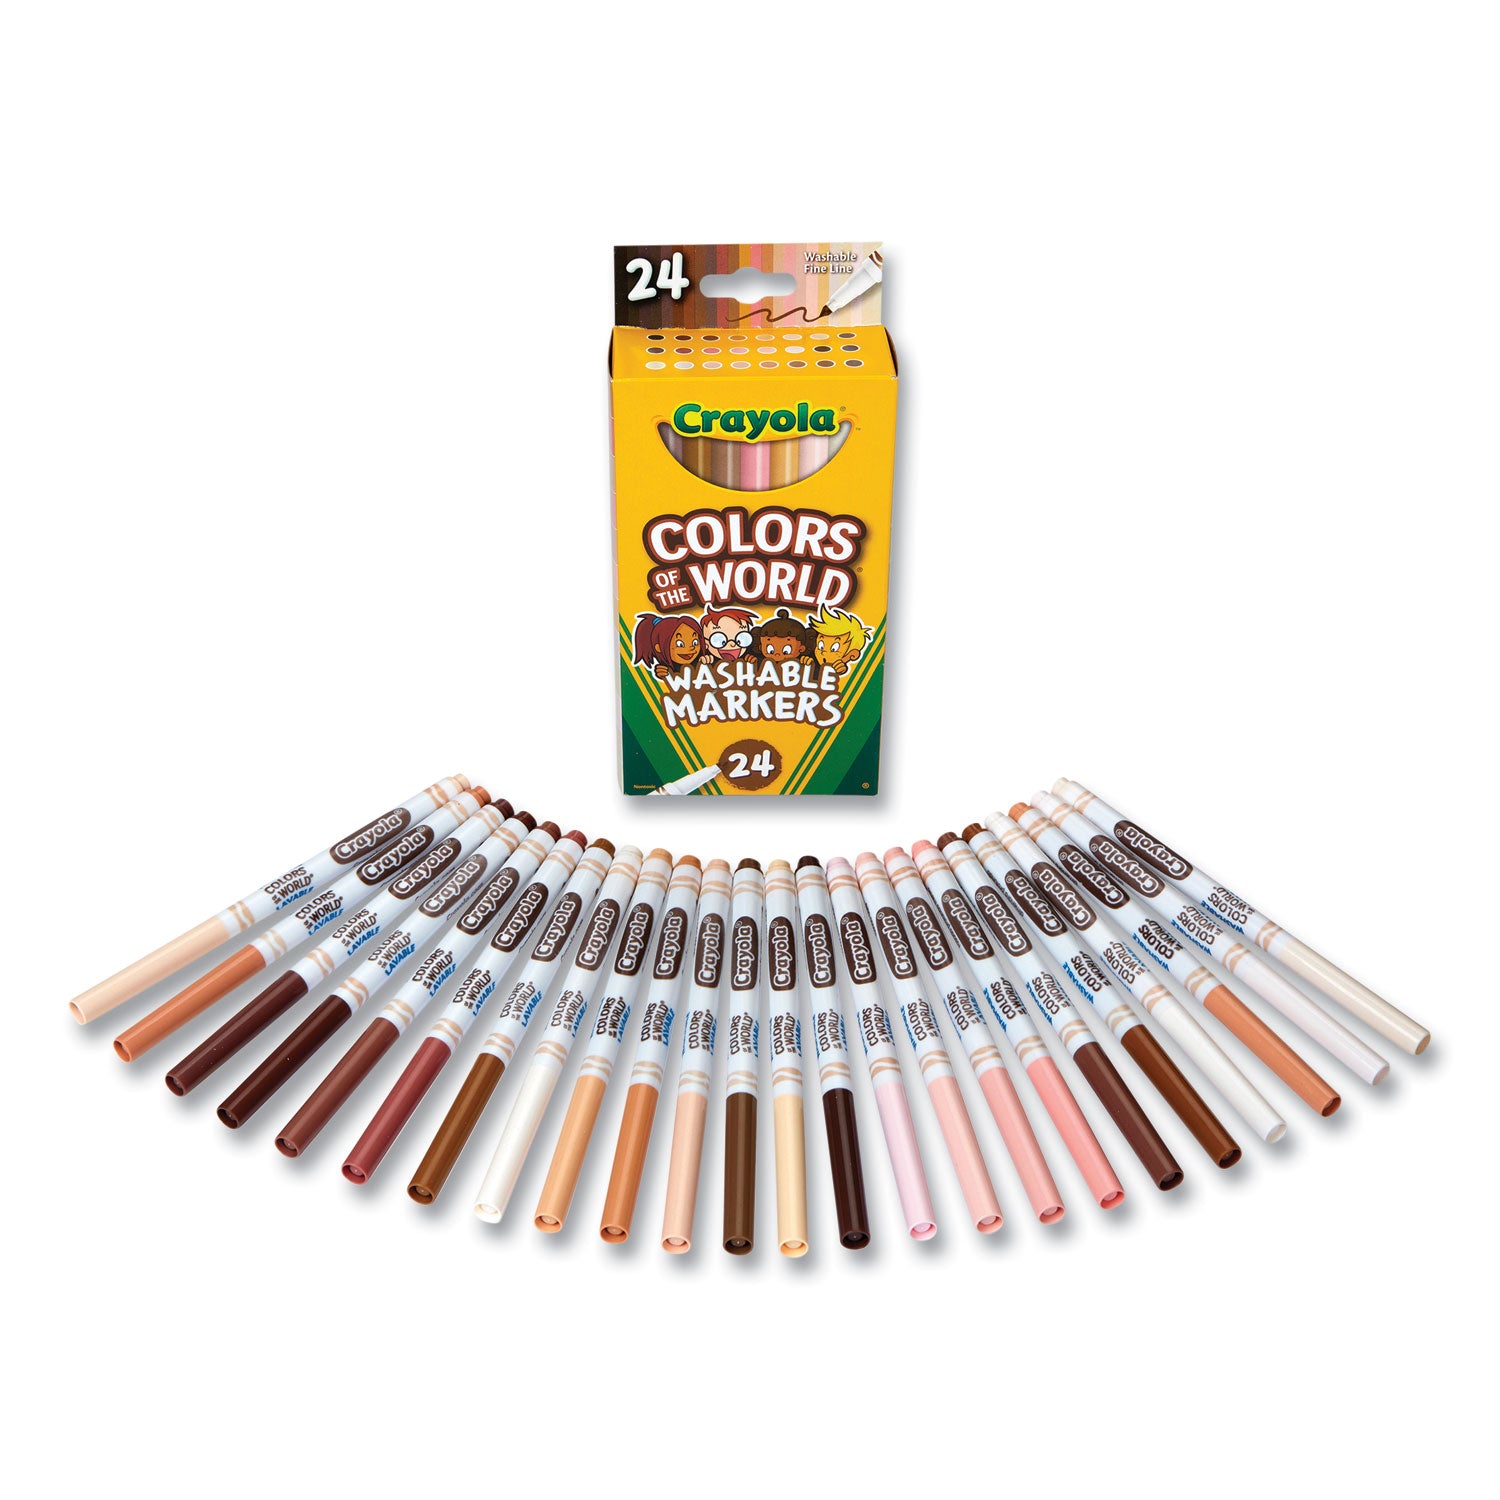 colors-of-the-world-washable-markers-fine-bullet-tip-assorted-colors-24-pack_cyo587810 - 2